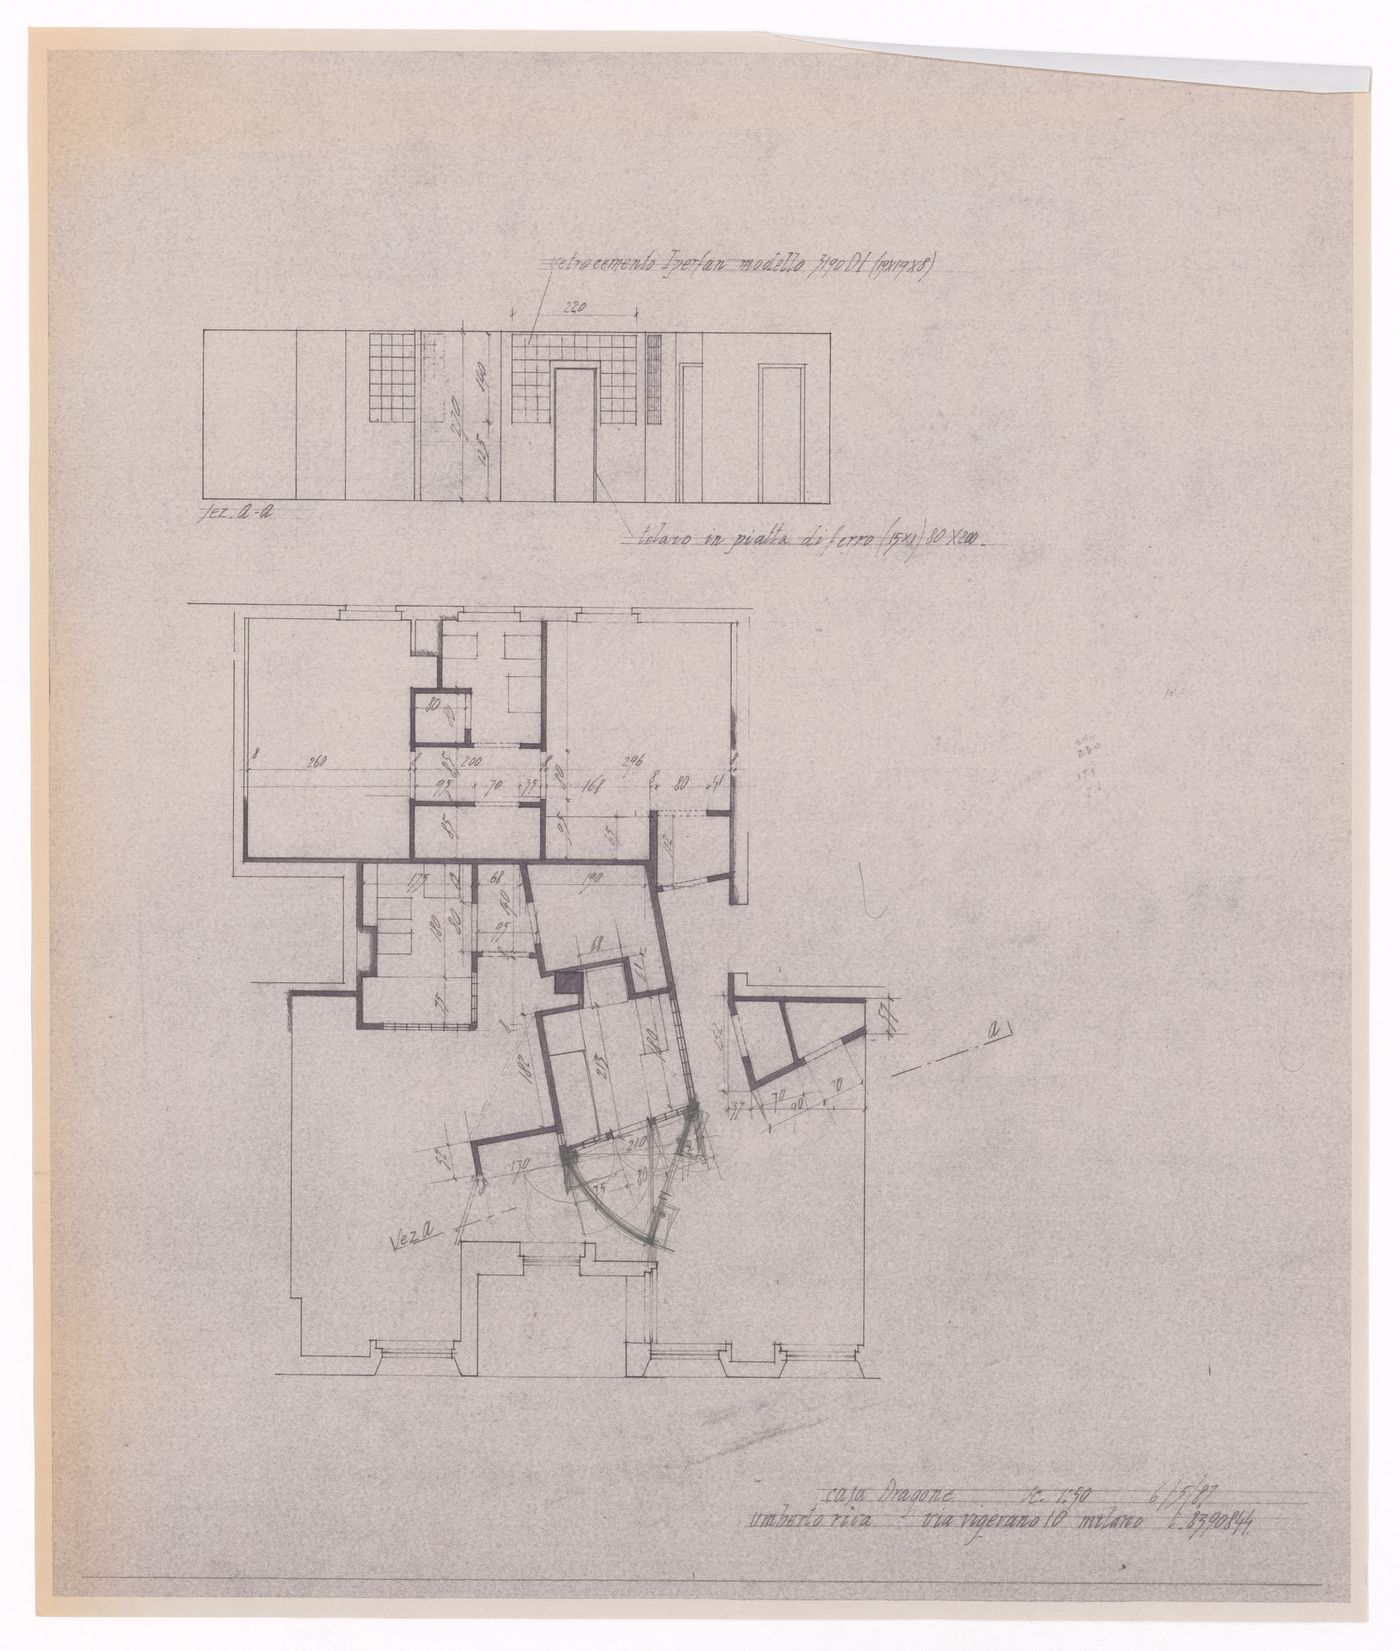 Elevation and floor plan for Casa Dragone e Paggi, Milan, Italy